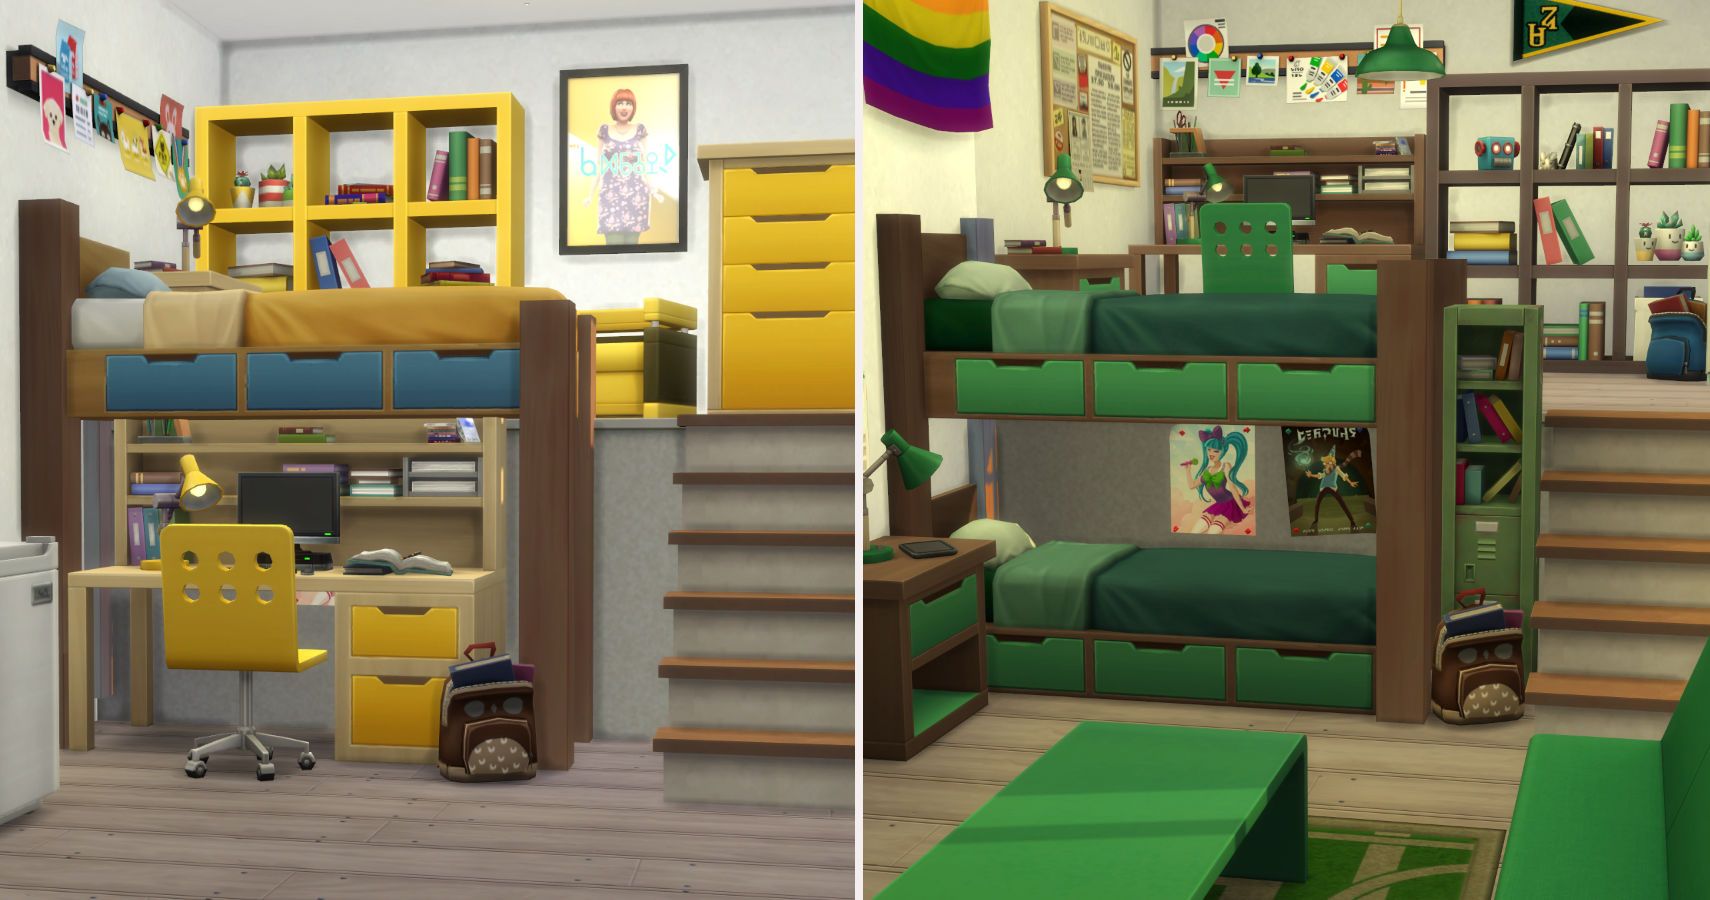 The Sims 4 A Step By Guide To, Sims 4 Cc Bunk Beds